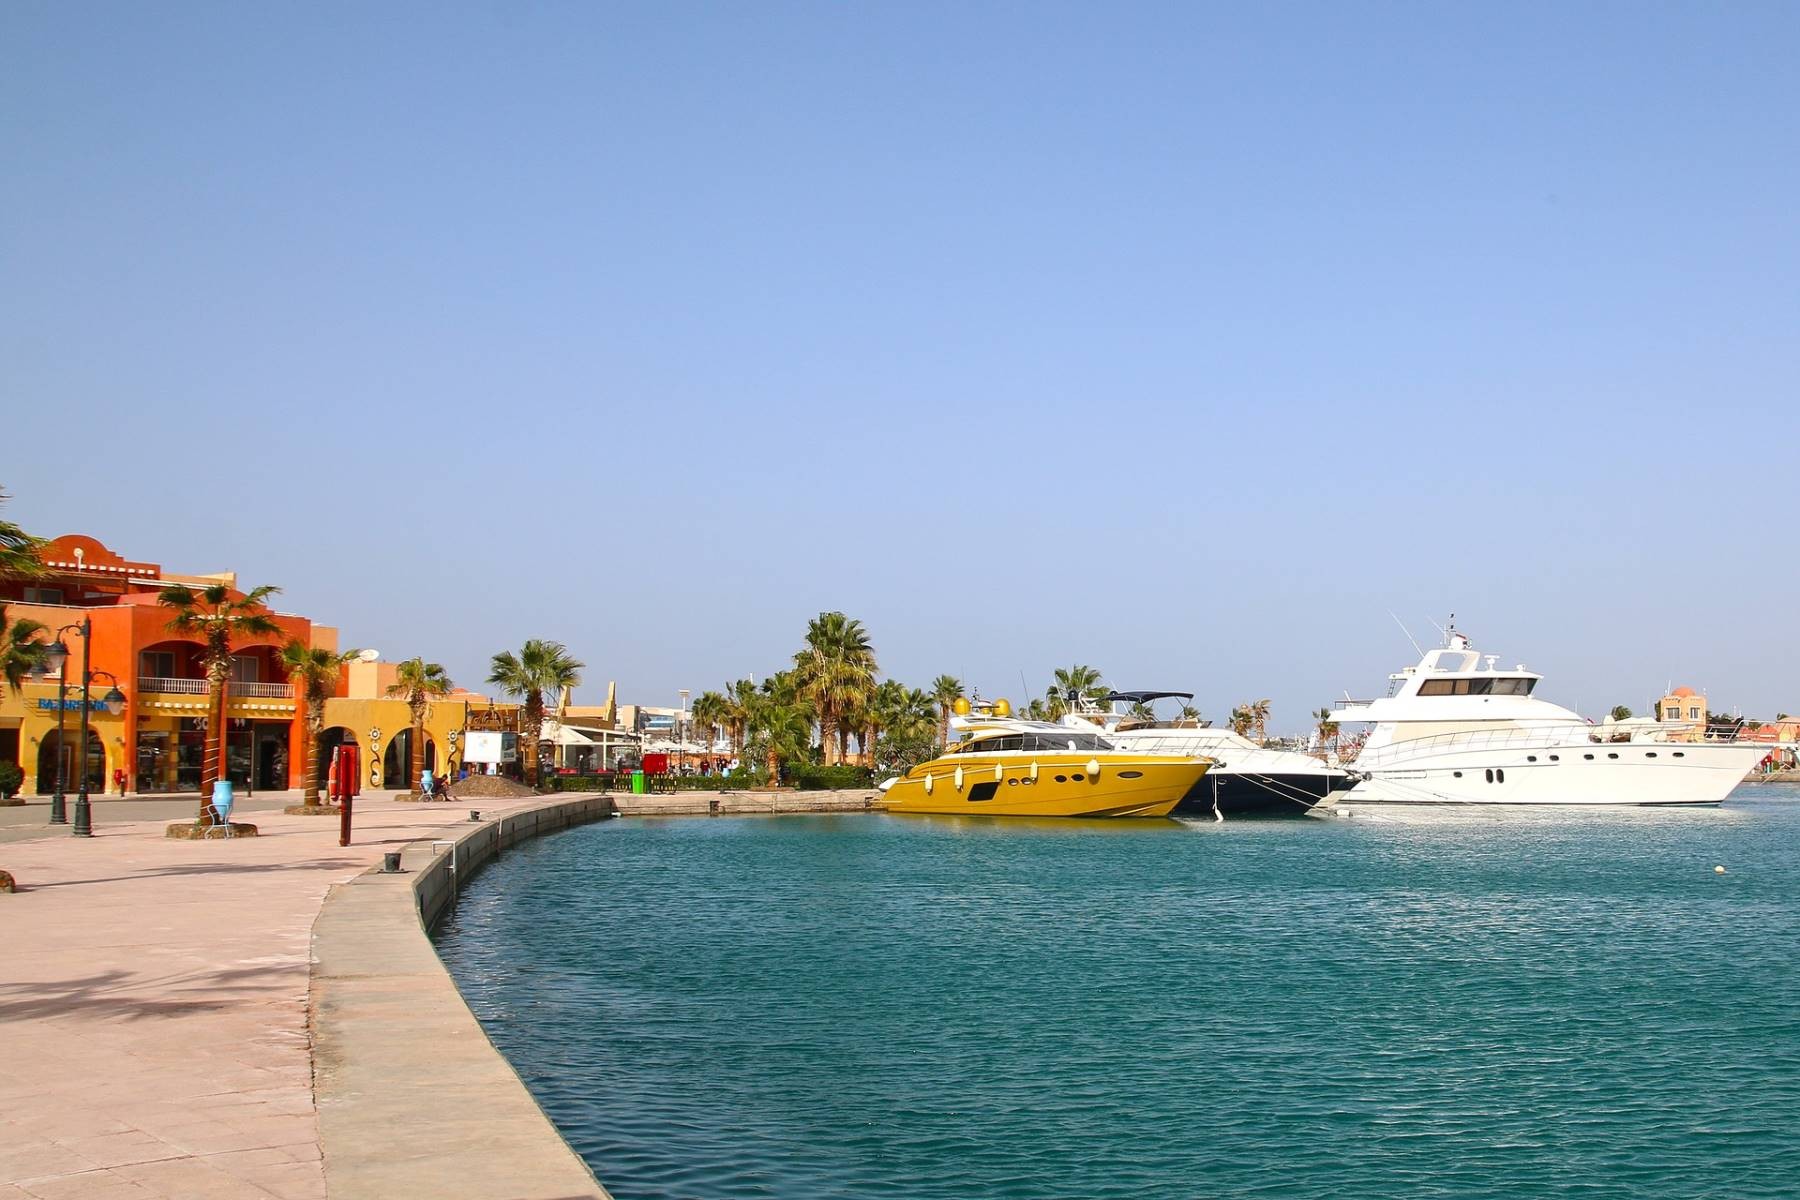 Places to visit in Hurghada